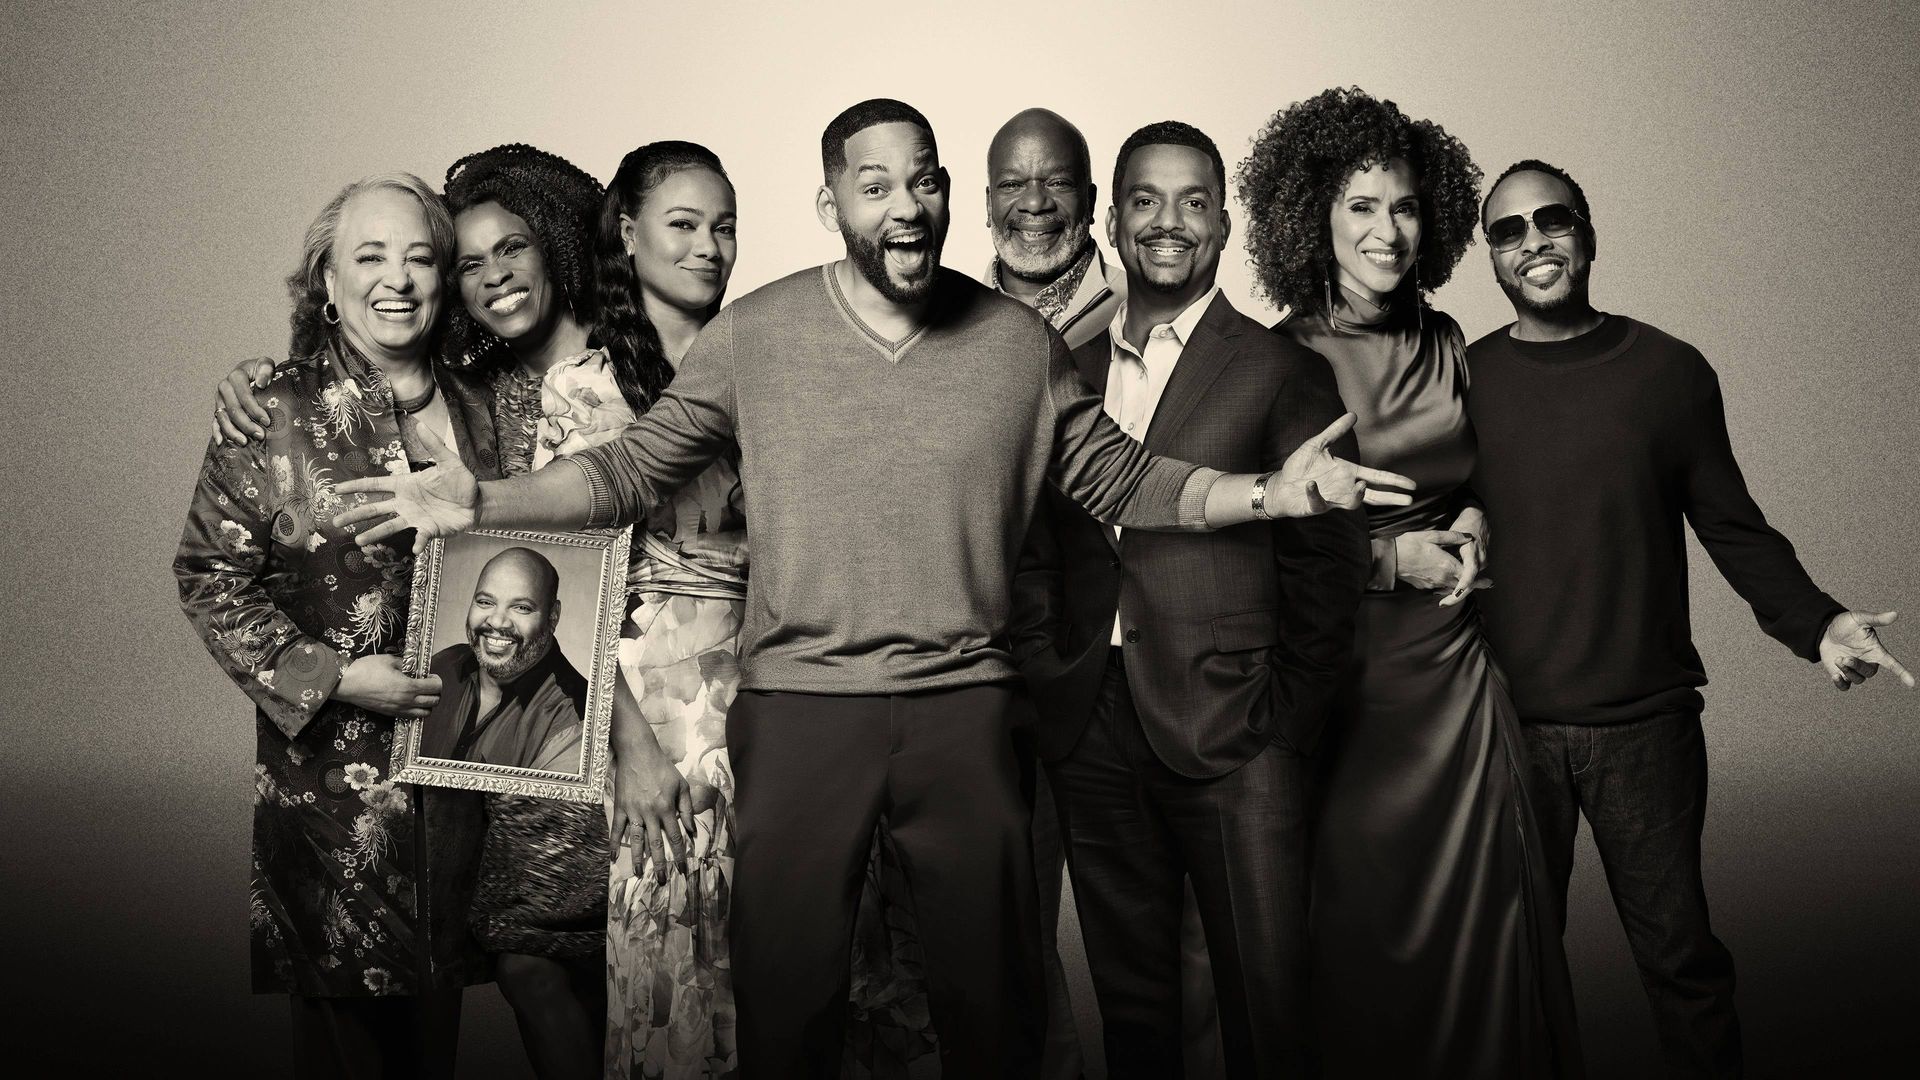 The Fresh Prince of Bel-Air Reunion background